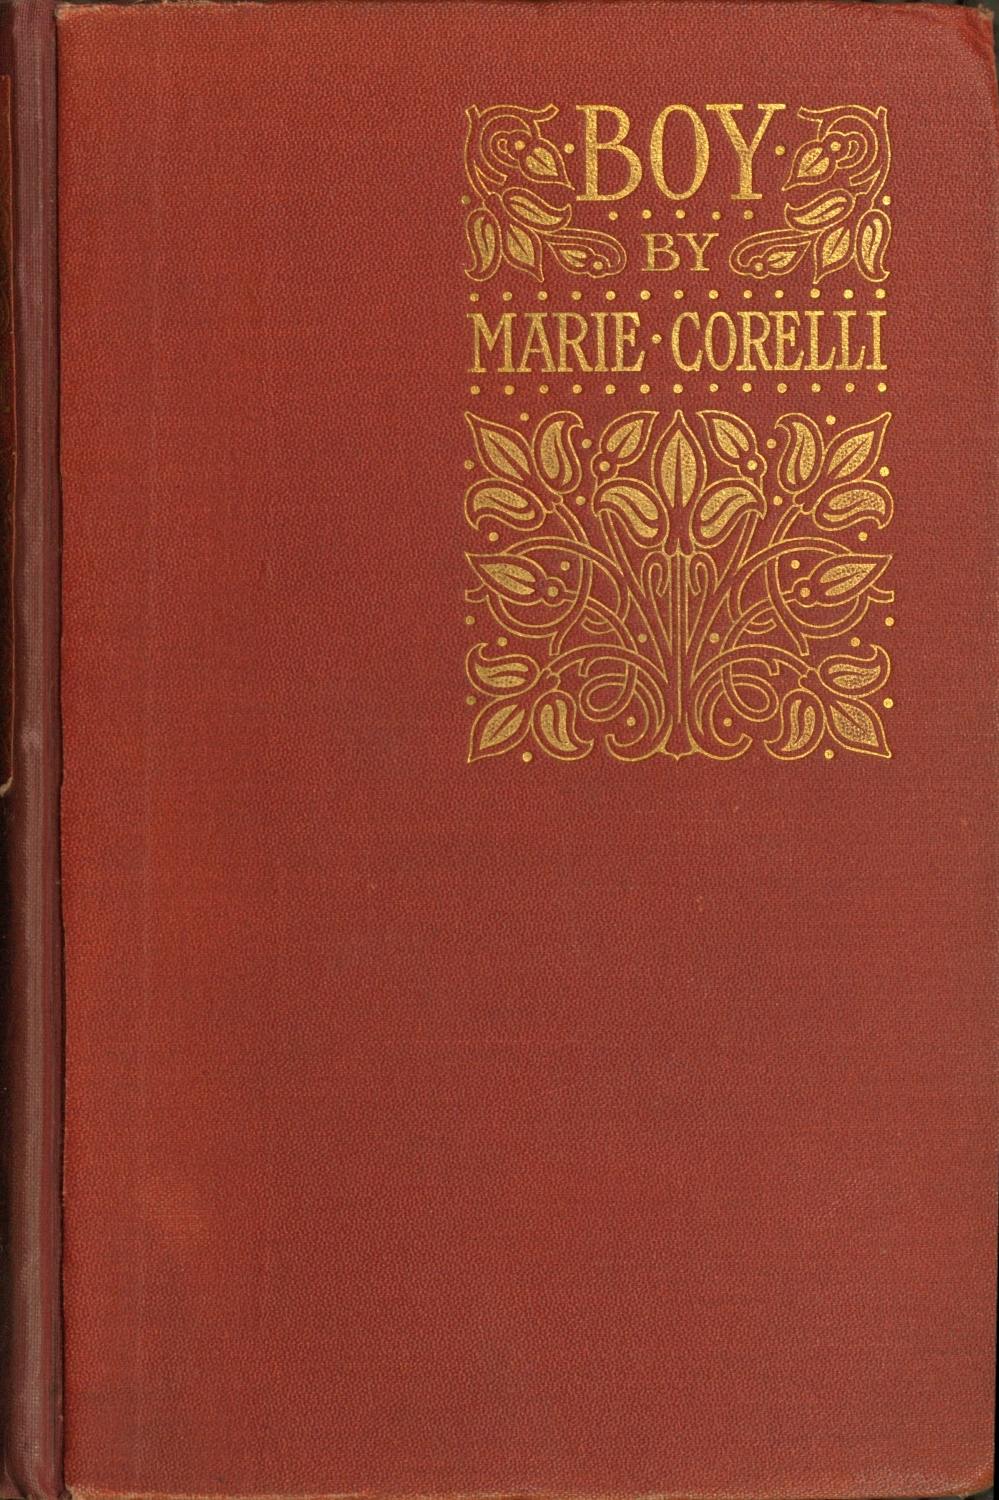 The Project Gutenberg eBook of Boy, by Marie Corelli. photo